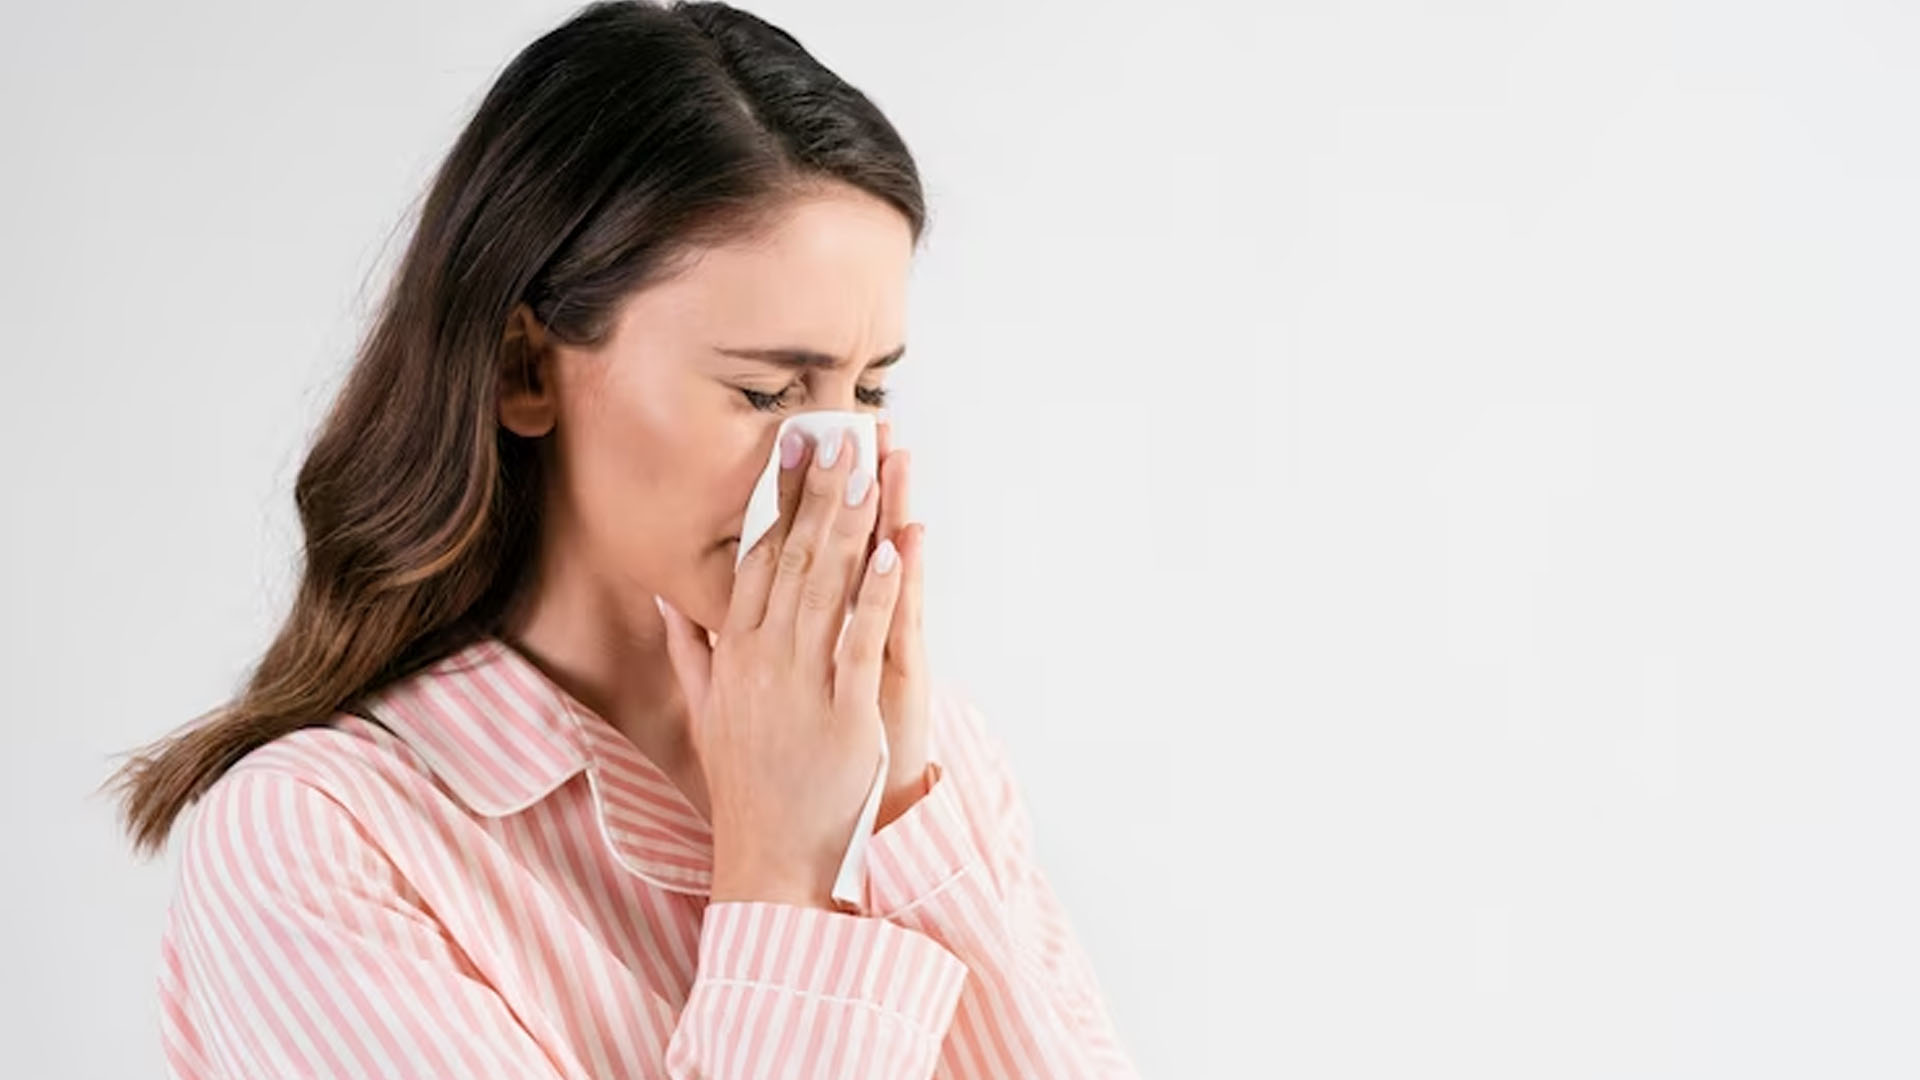 What are the Symptoms of Sneezing?